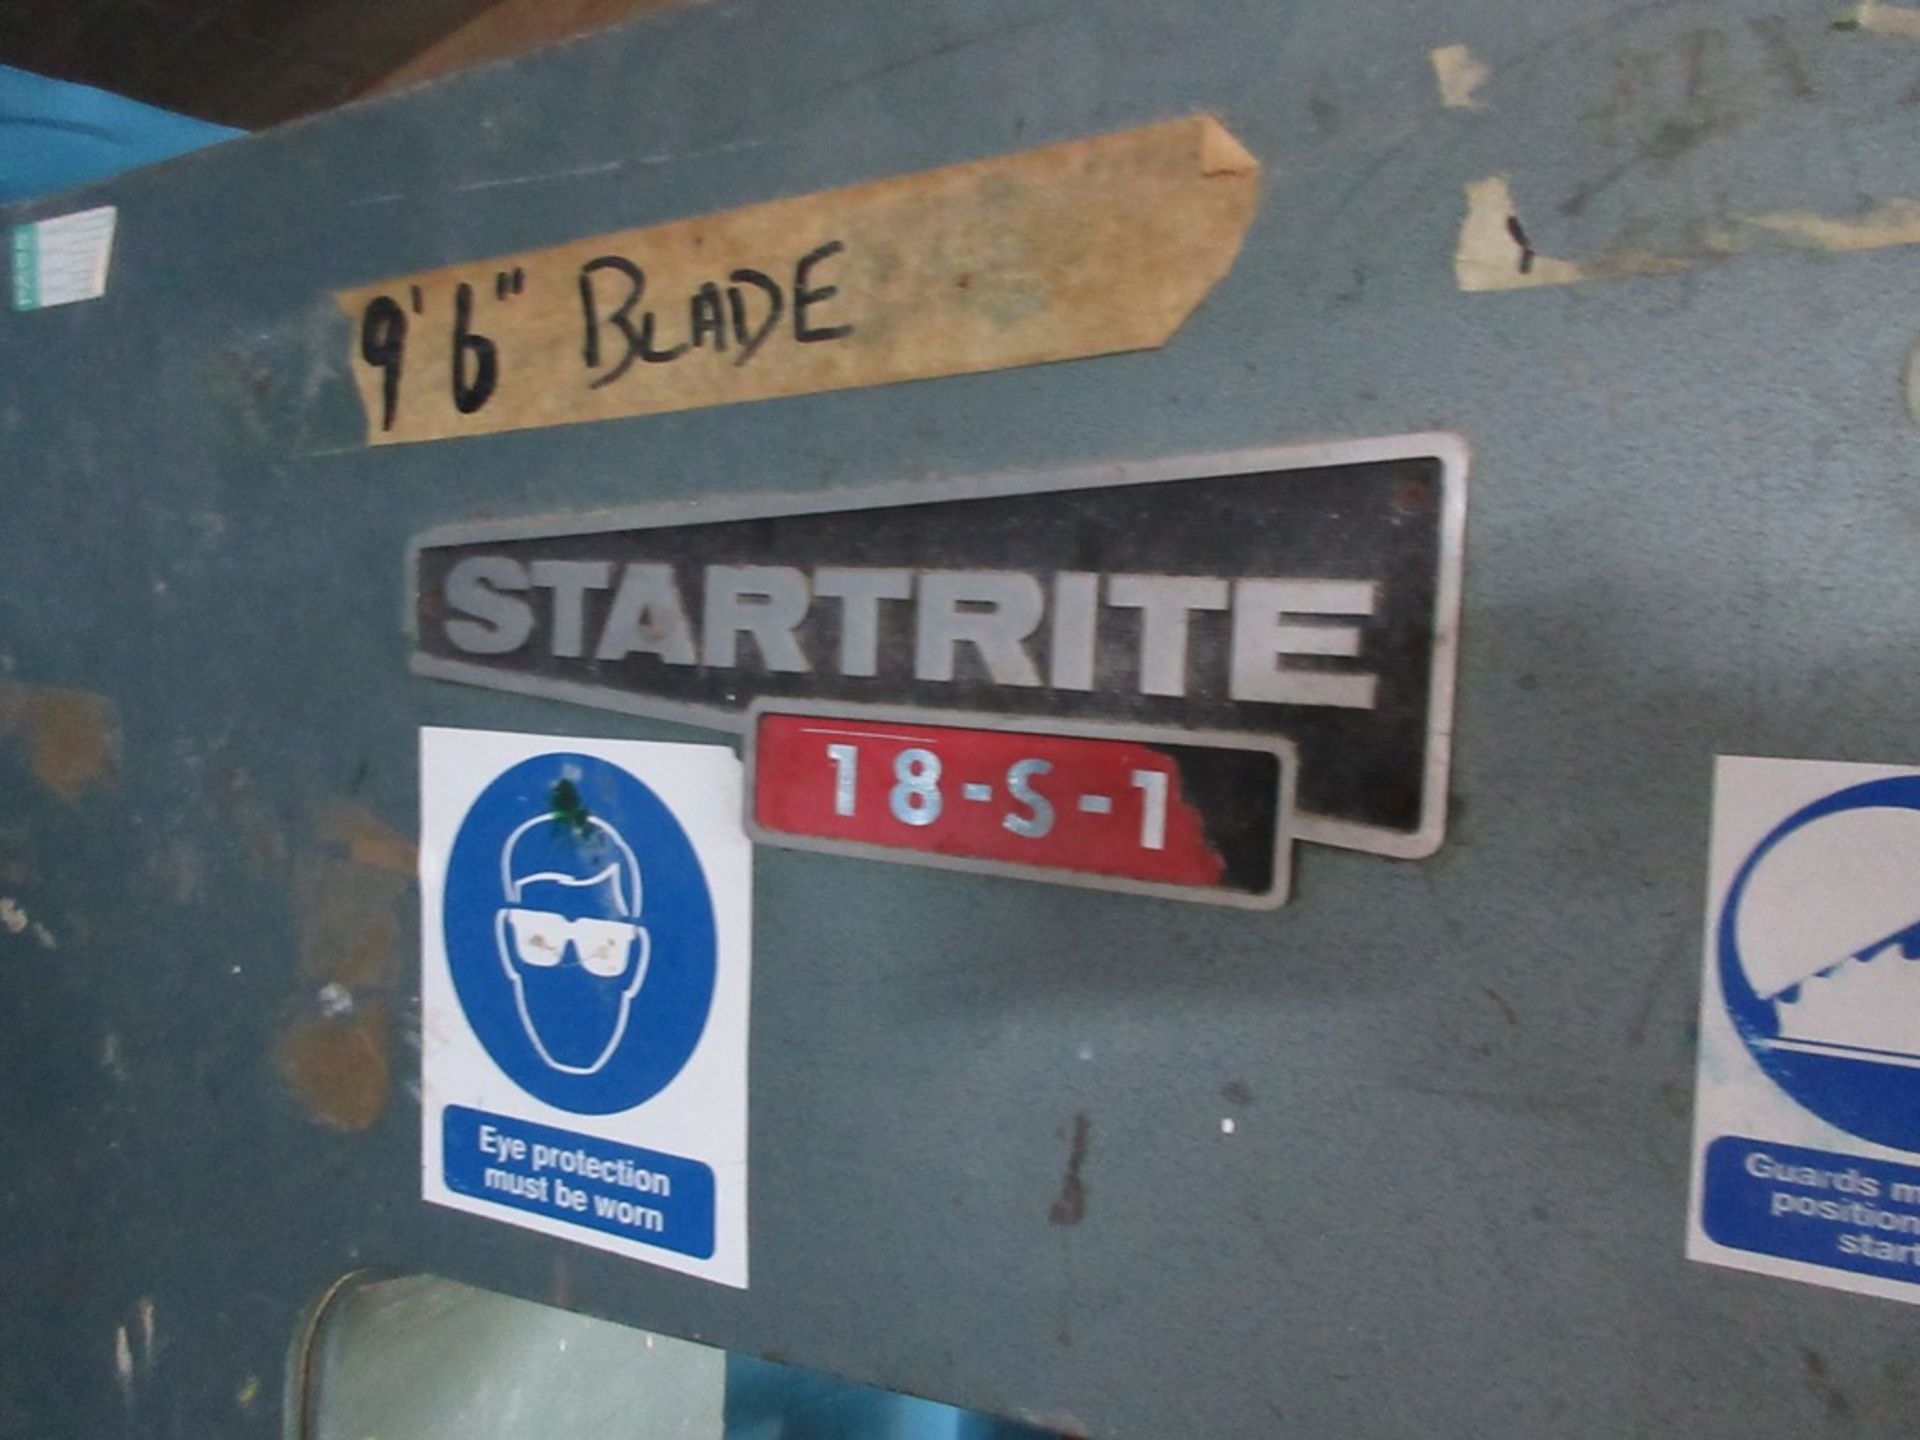 Startrite 18-S-1 vertical bandsaw - Image 3 of 4